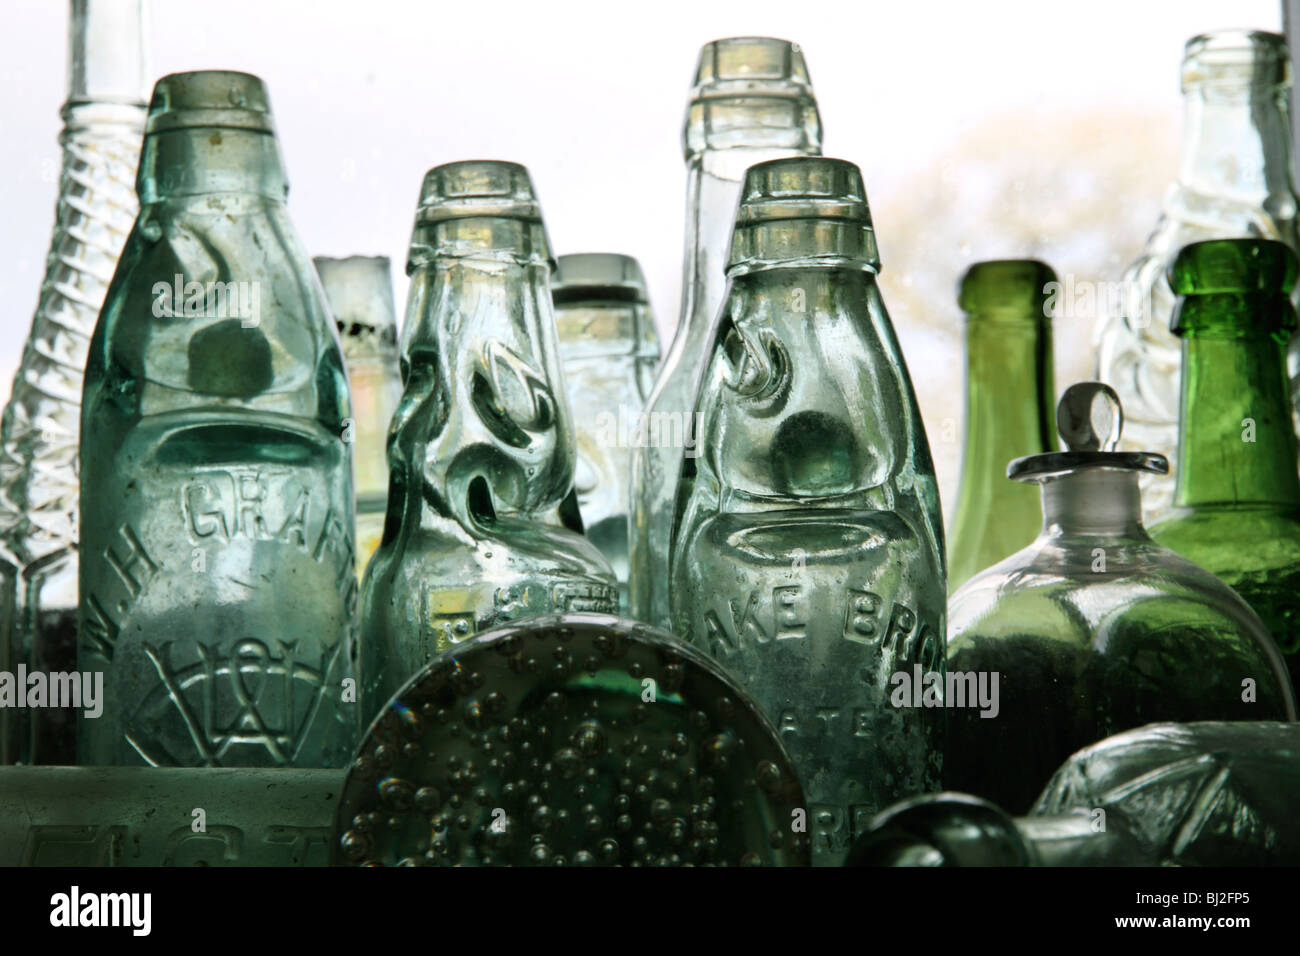 Victorian mineral water bottles Stock Photo